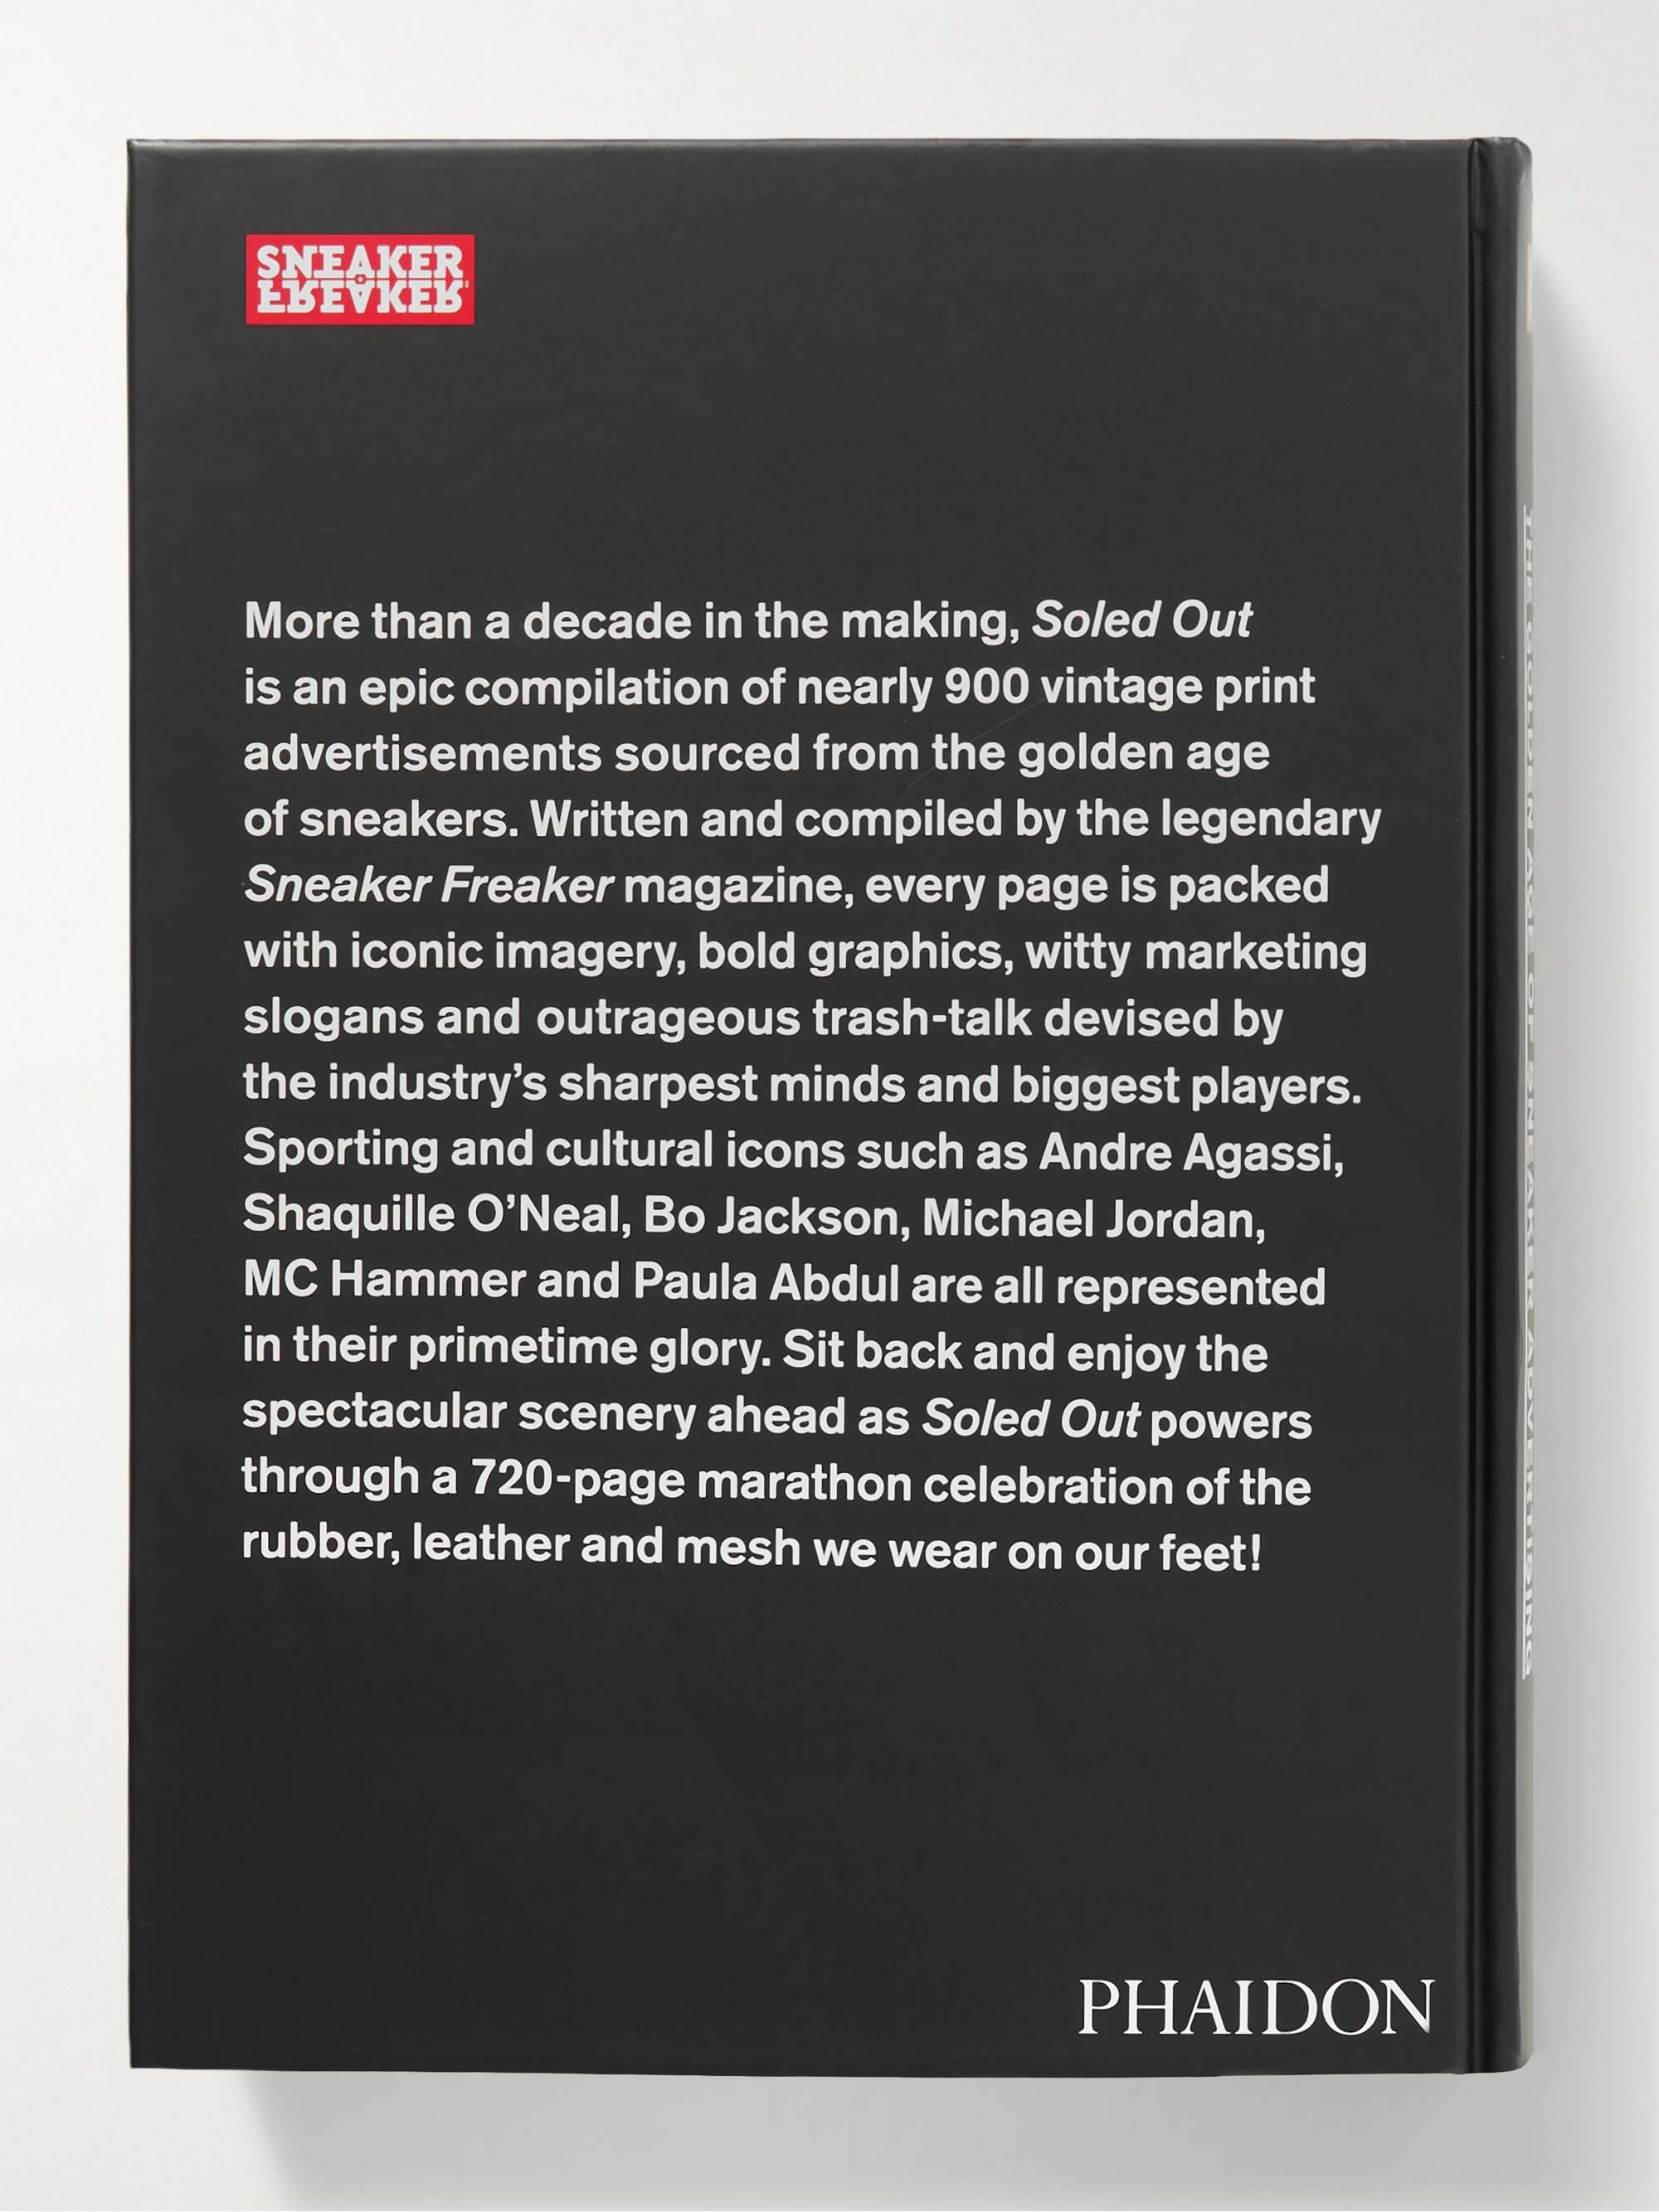 PHAIDON Soled Out: The Golden Age of Sneaker Advertising Hardcover Book